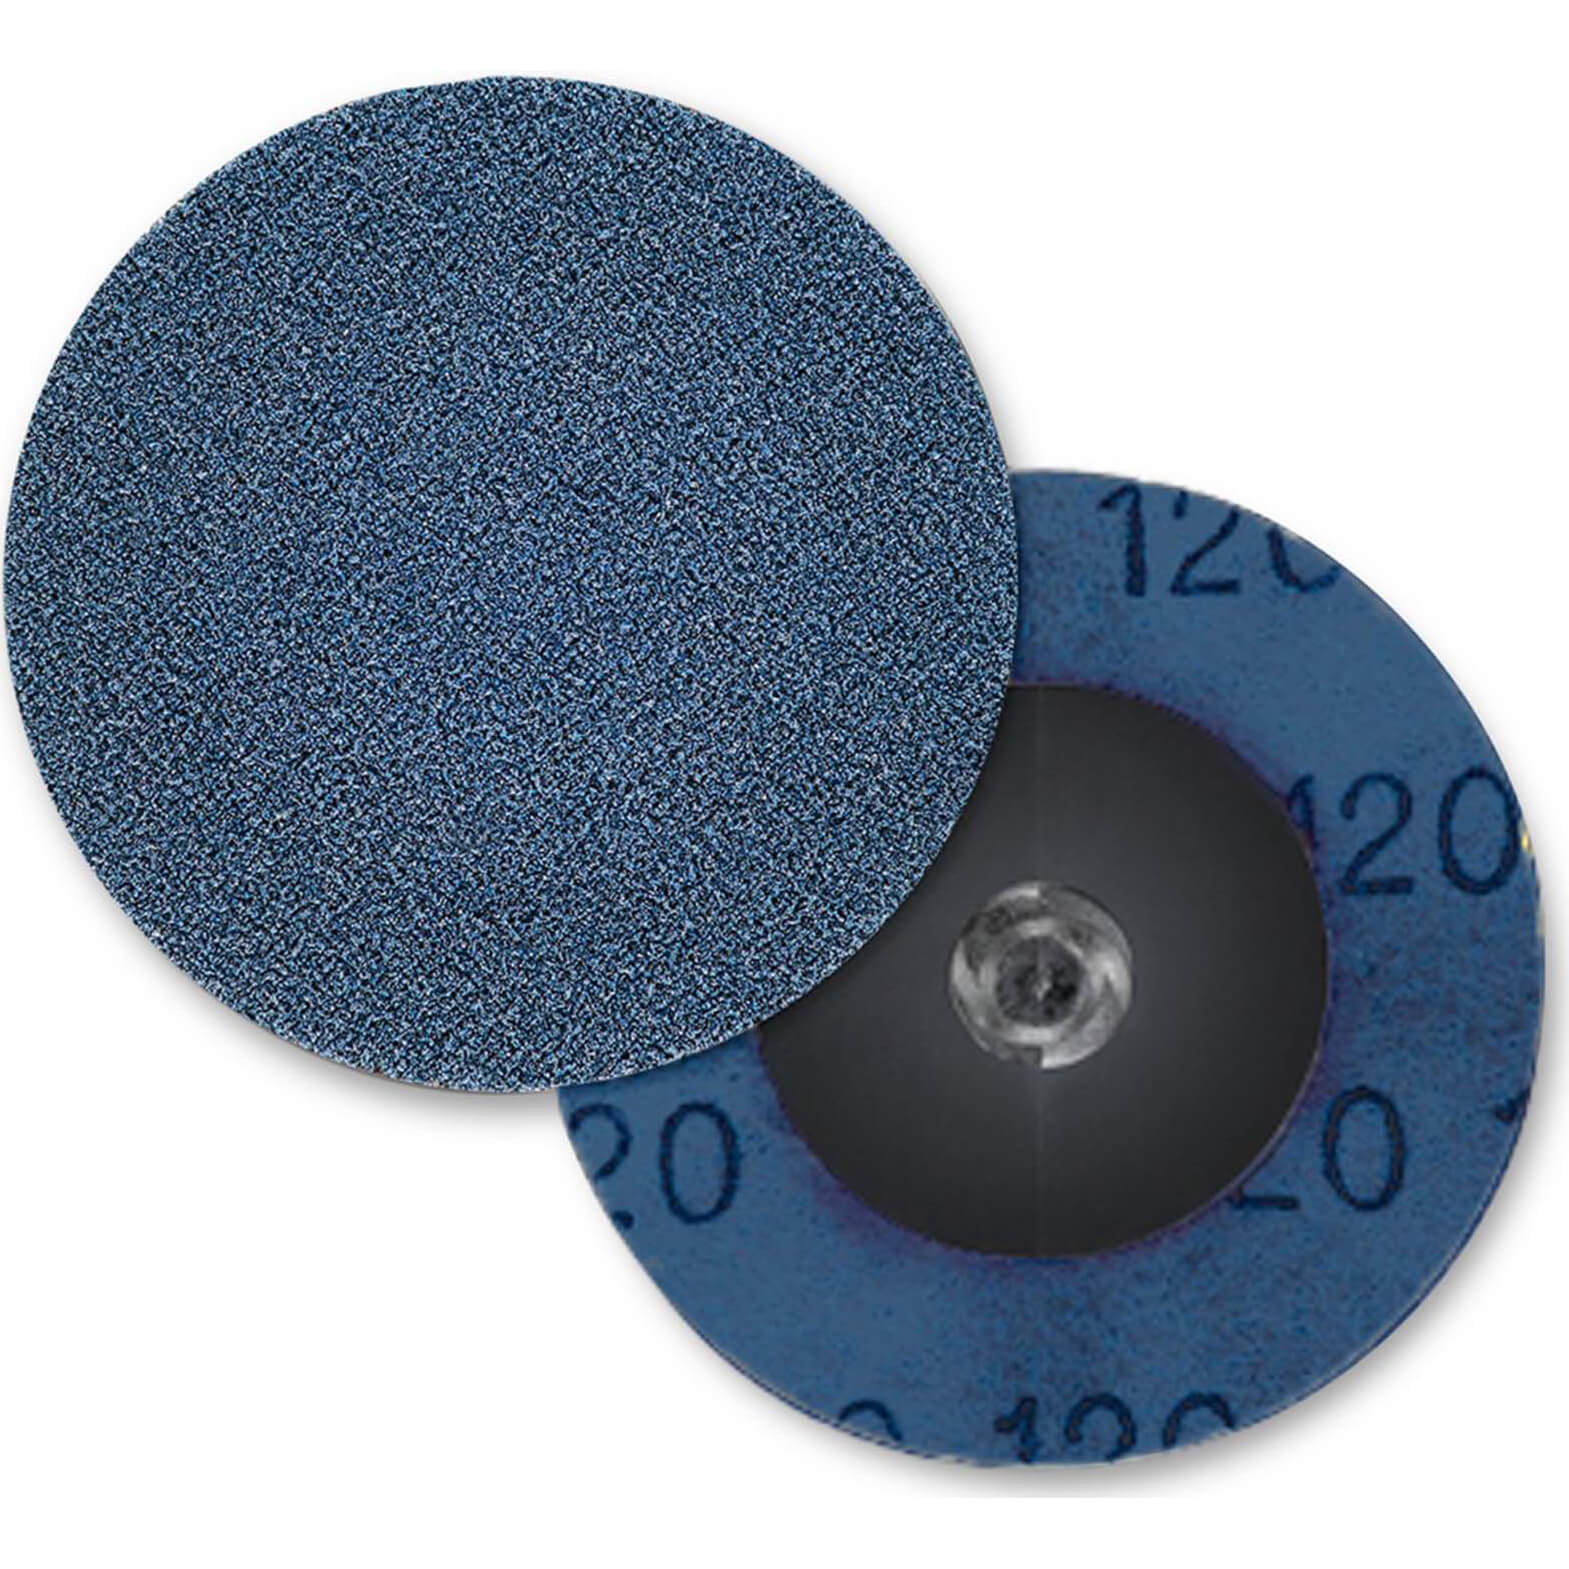 Image of Sia 2820 Siamet X Quick Change Abrasives Discs 50mm 120g Pack of 1